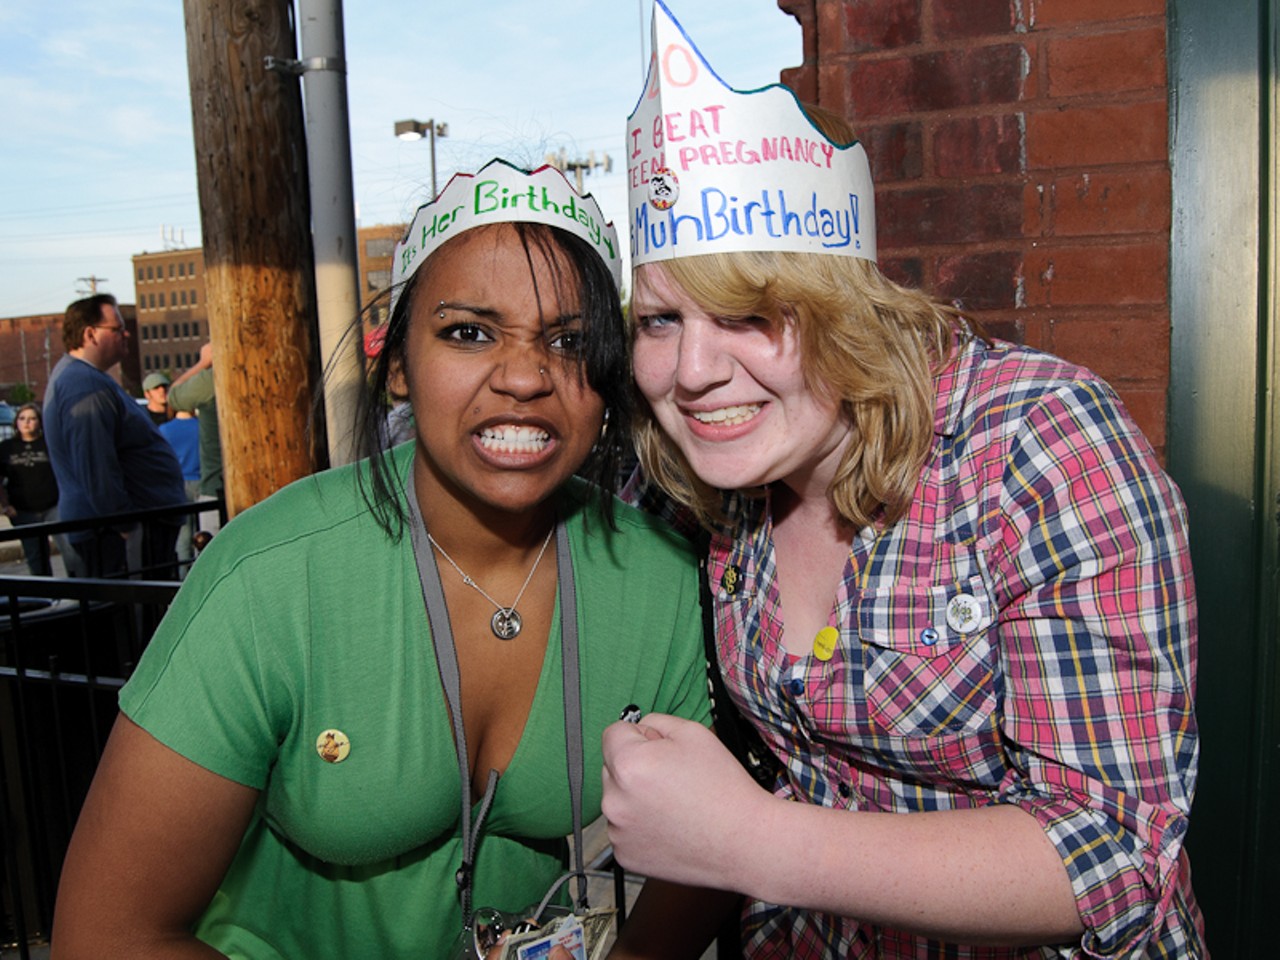 First in line (at 1:00 p.m.), Mariel Wilding and Jennifer Pierce were celebrating birthdays as well as a concert.